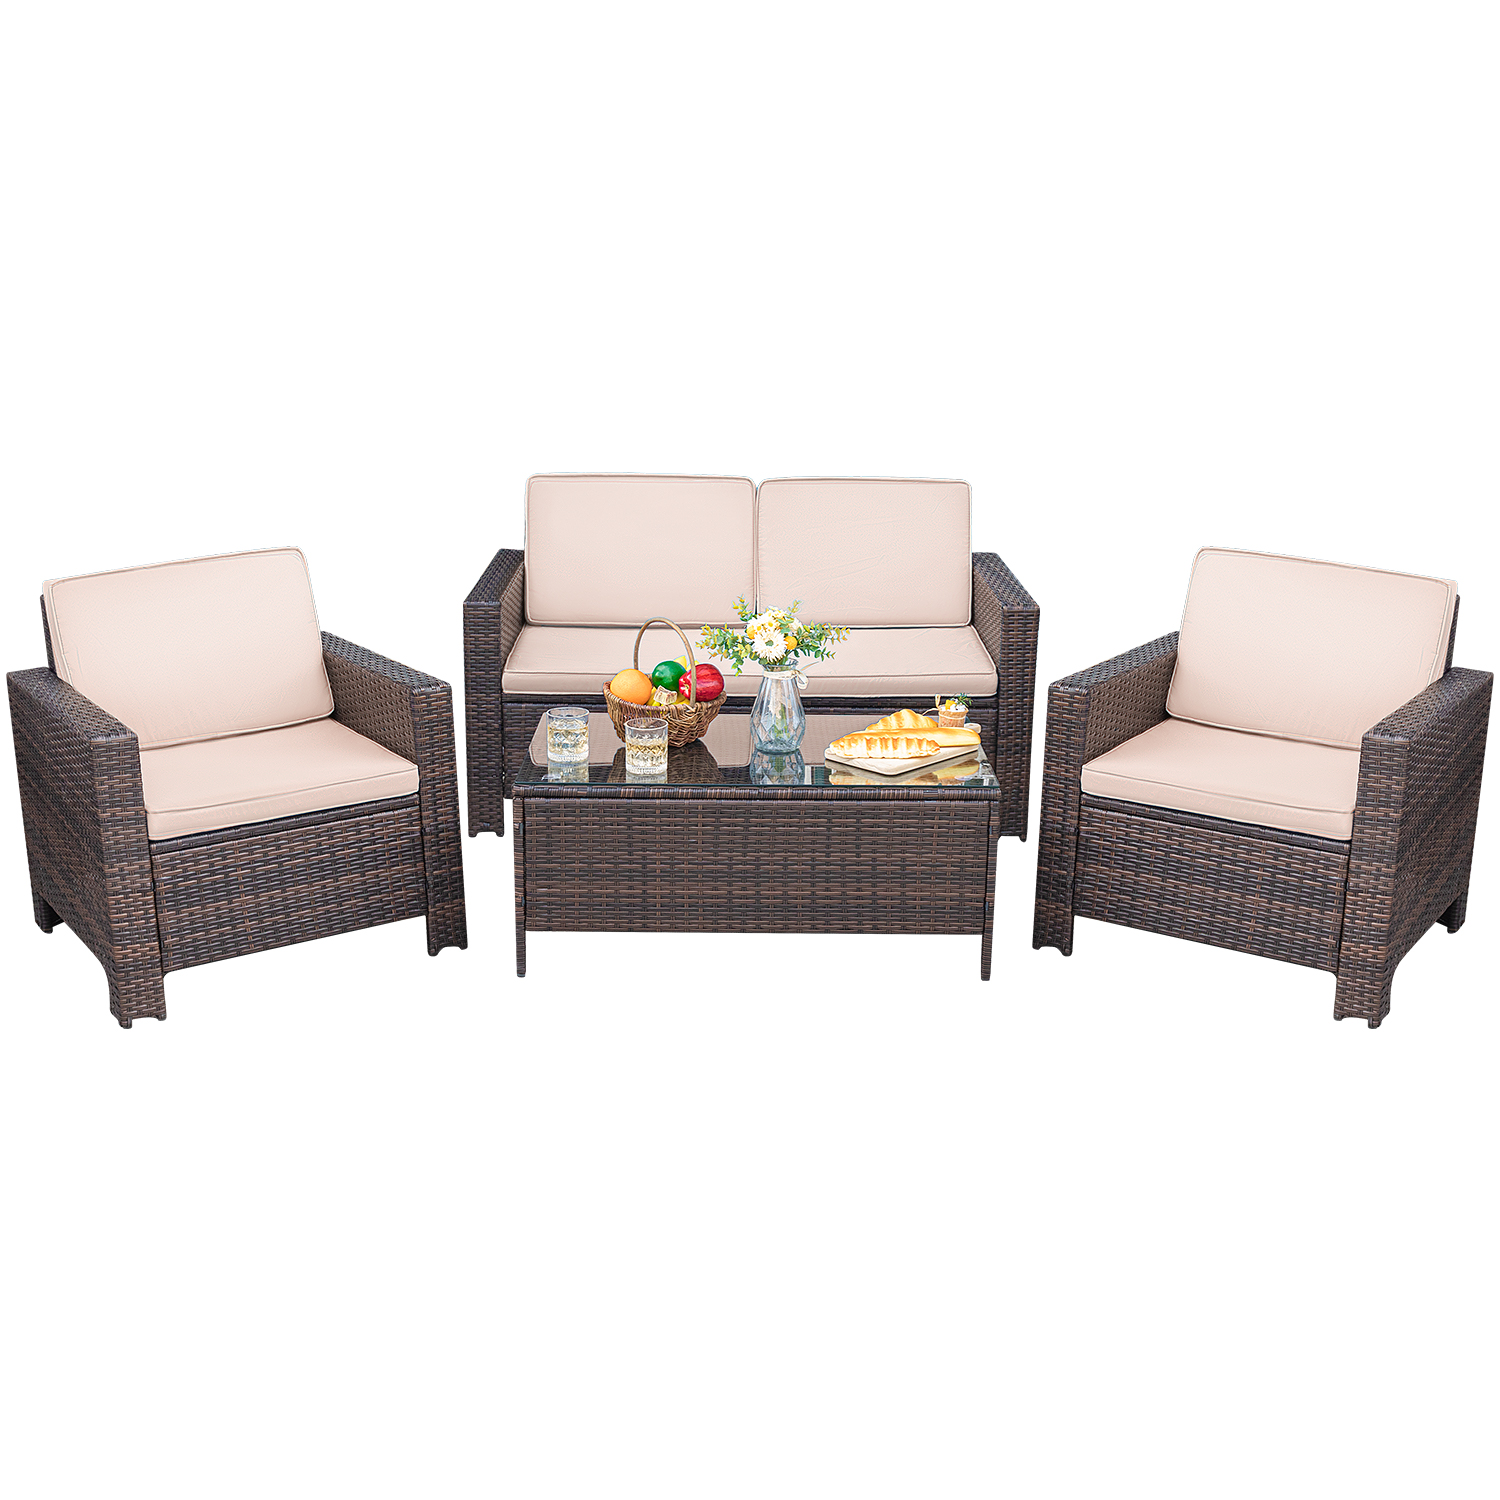 Lacoo 4 Pieces Patio Furniture Sets Rattan Chair Wicker Conversation Sofa Set Outdoor Backyard Porch Garden Poolside Balcony Use Furniture, Beige - image 2 of 7